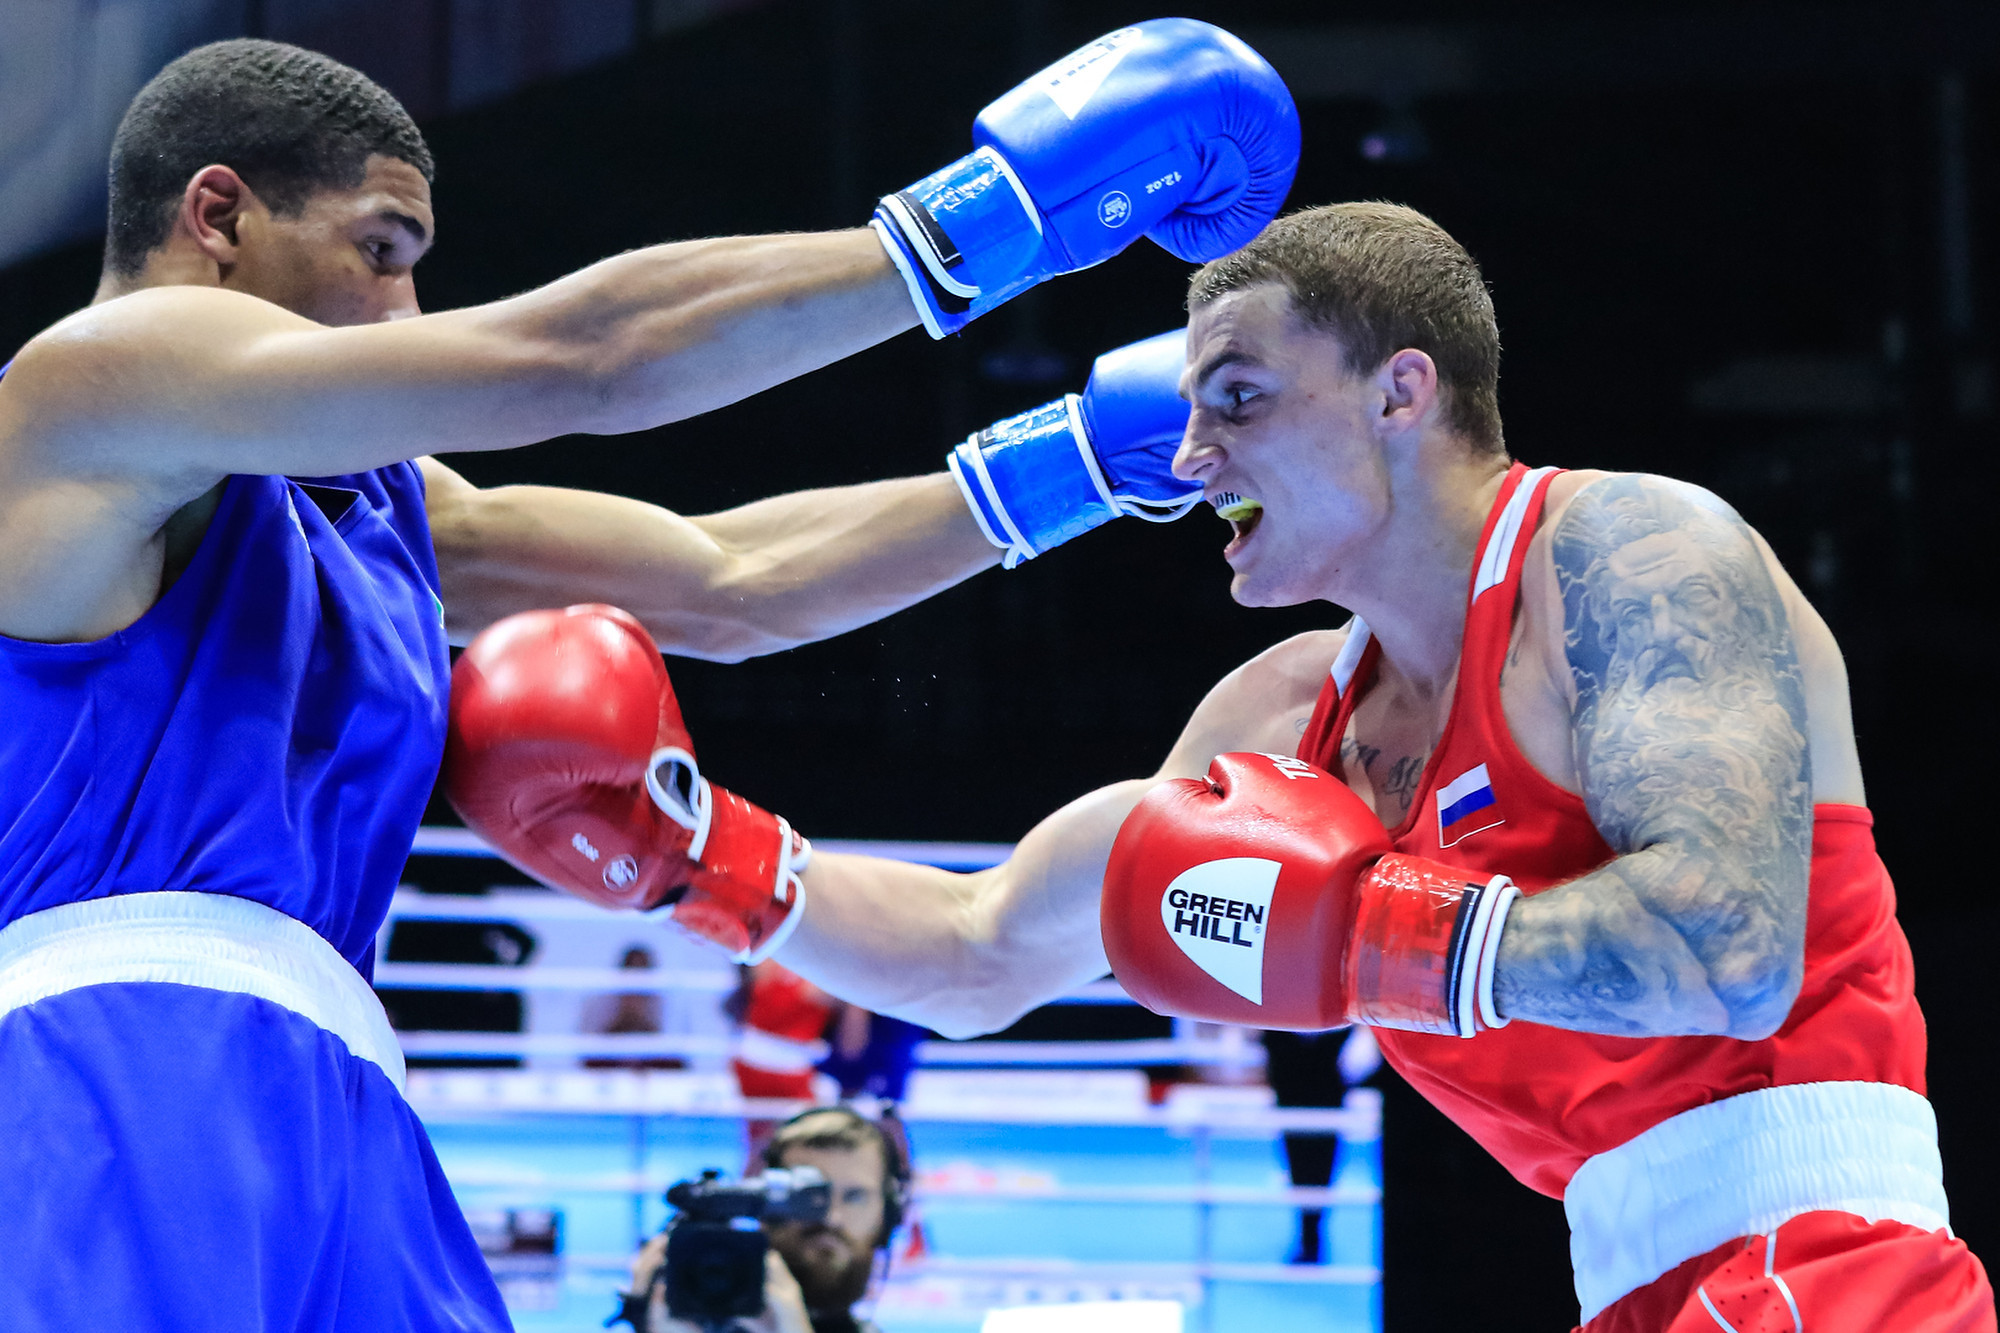 Russia's Gleb Bakshi progressed to the middleweight gold-medal bout with a victory over Hebert Conceicao Sousa of Brazil ©Yekaterinburg 2019